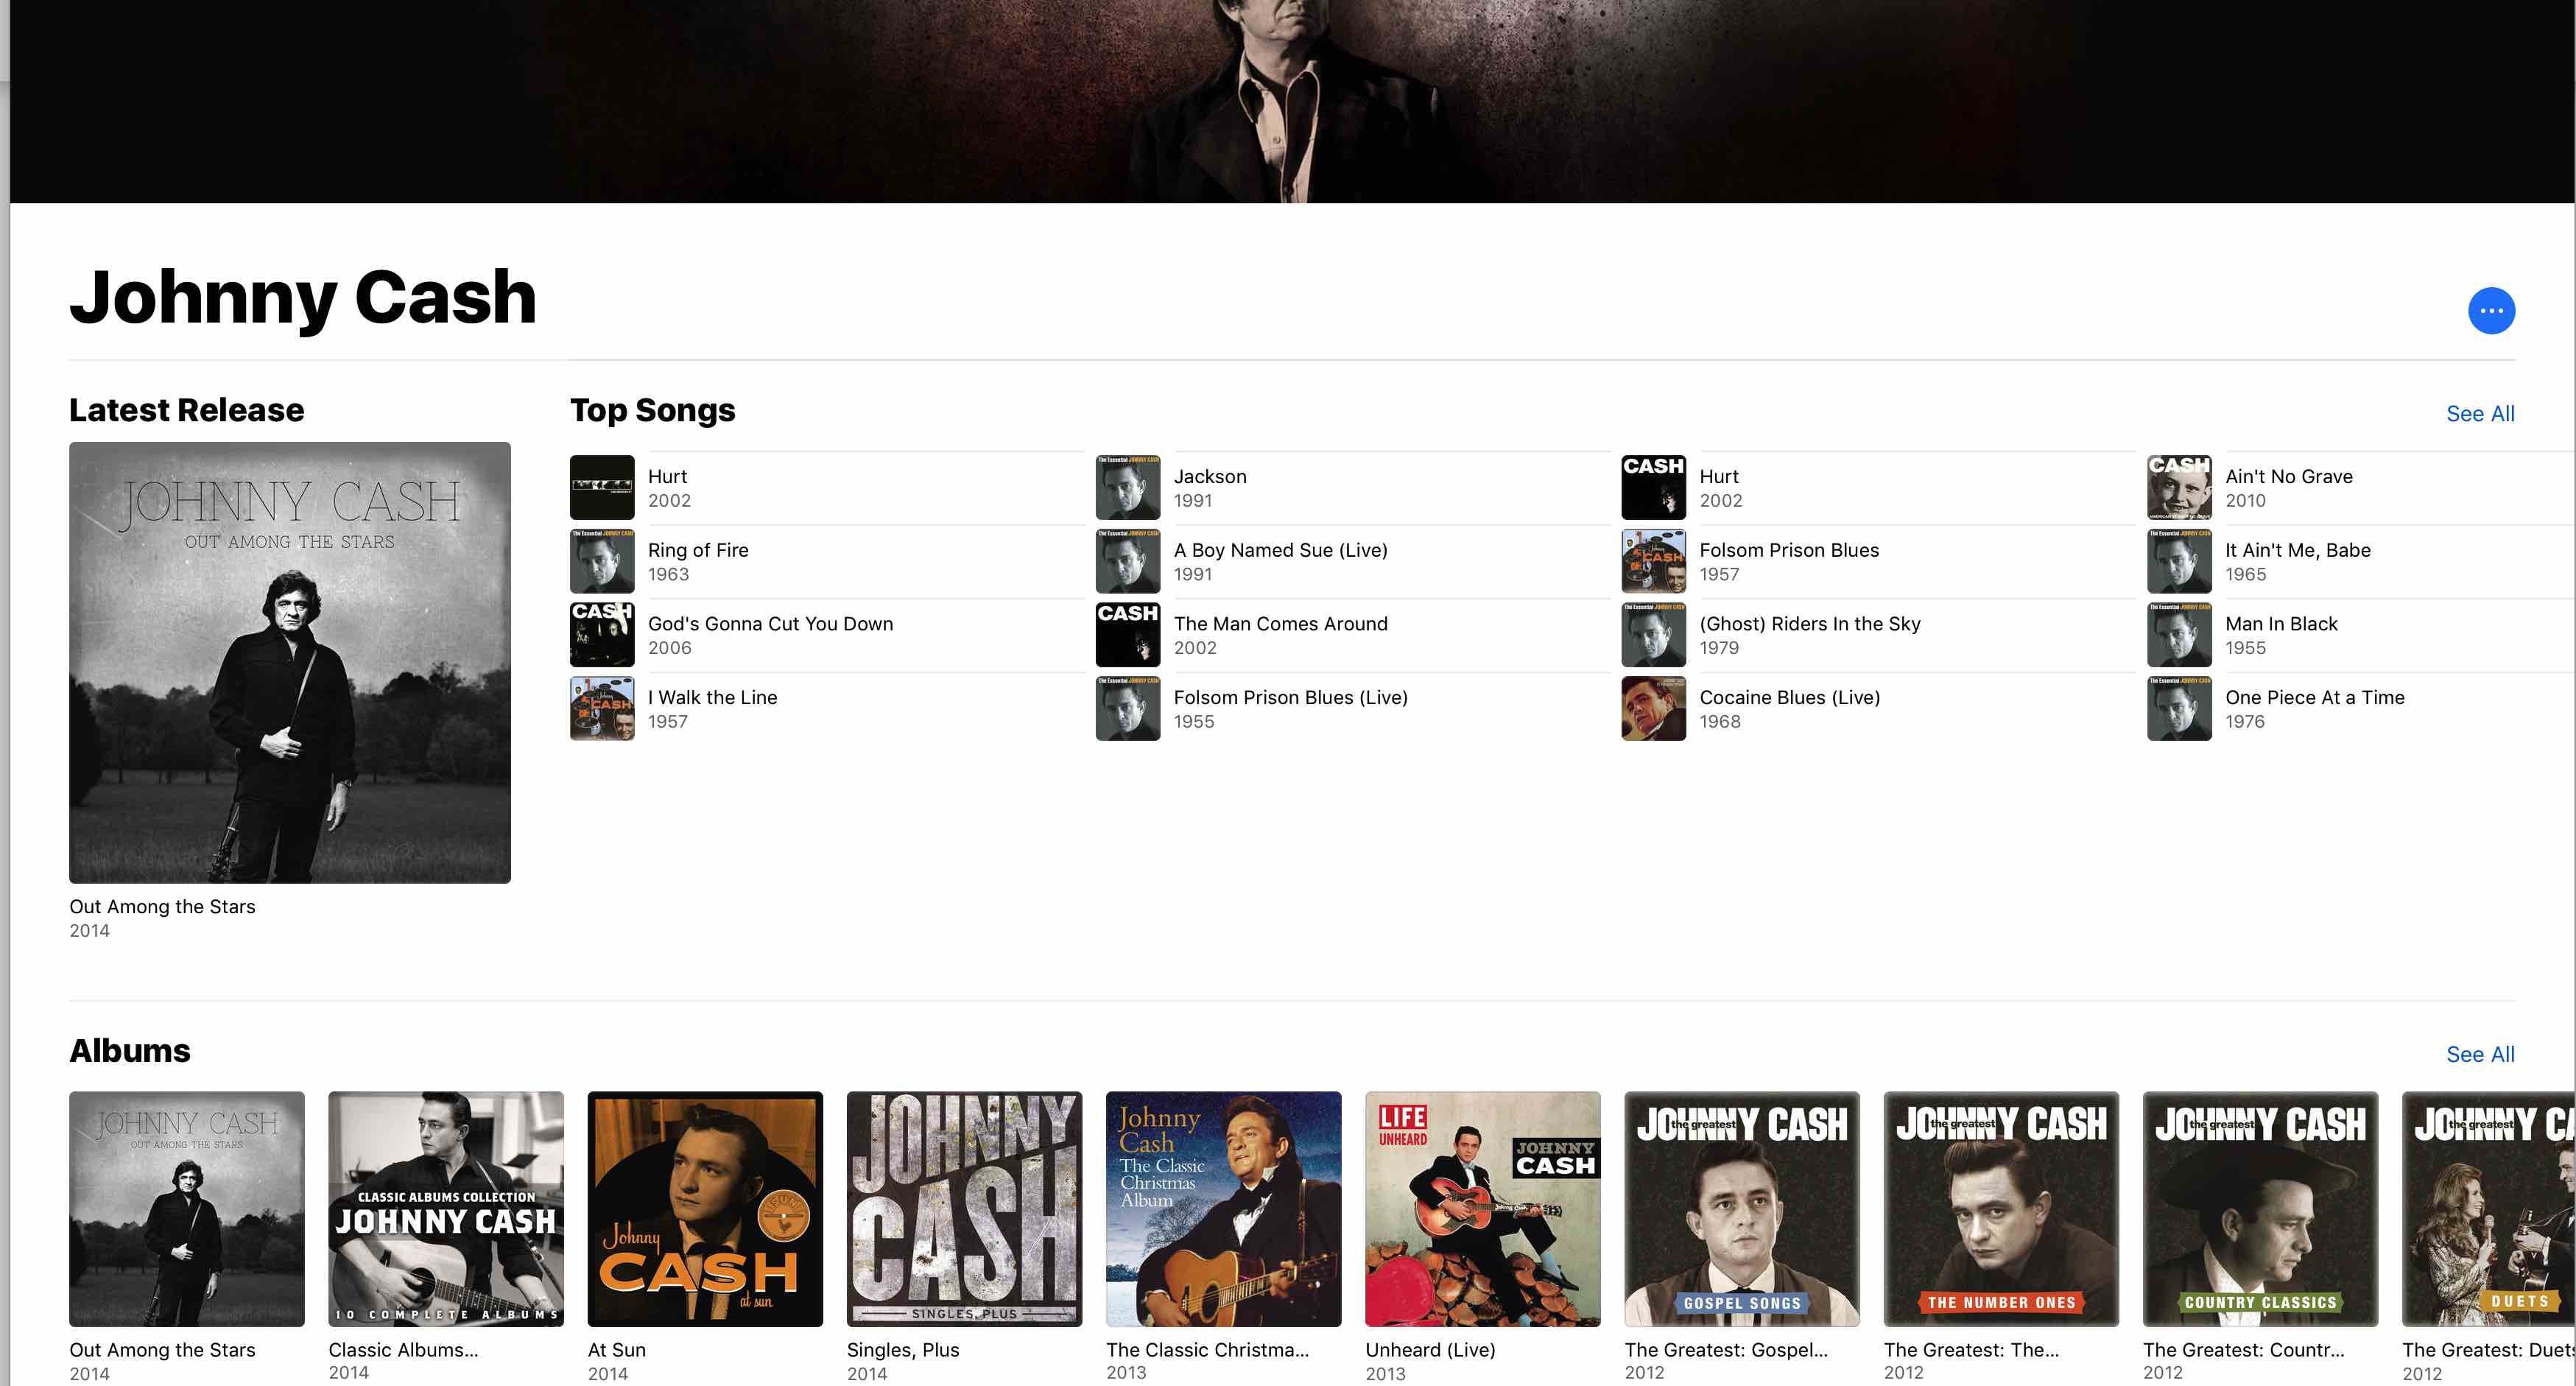 Chash: albums, songs, playlists